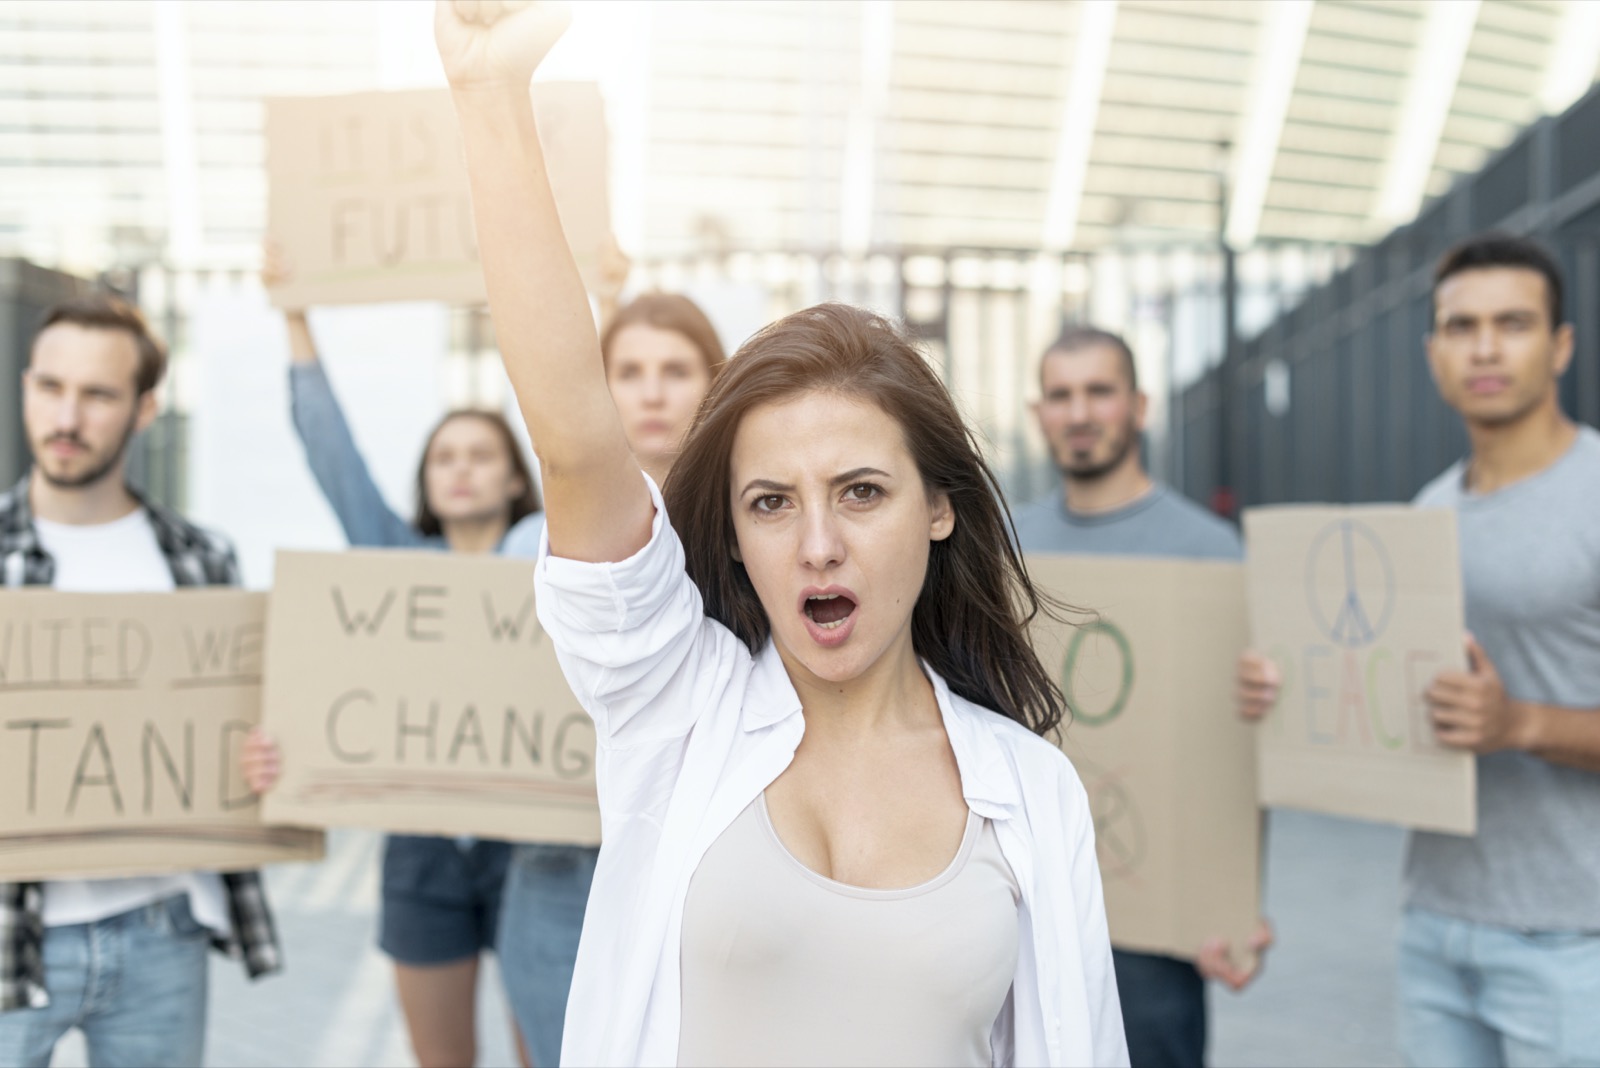 Would You Make a Good World Leader? Take This Quiz to Find Out Protestors